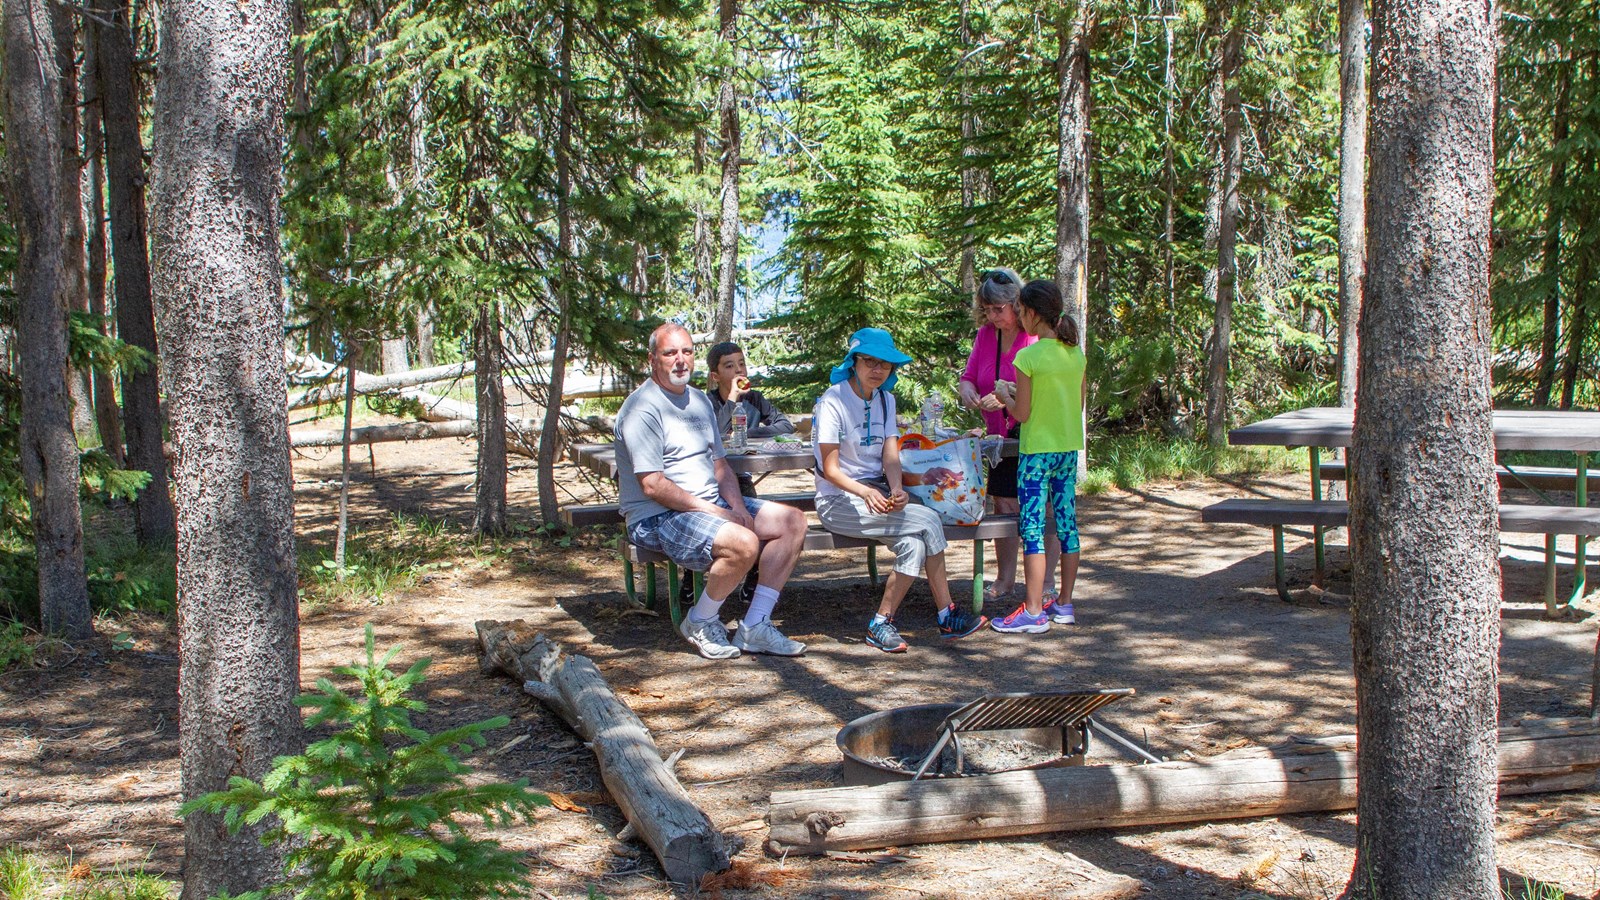 Five people eating at a picnic table in the woods.